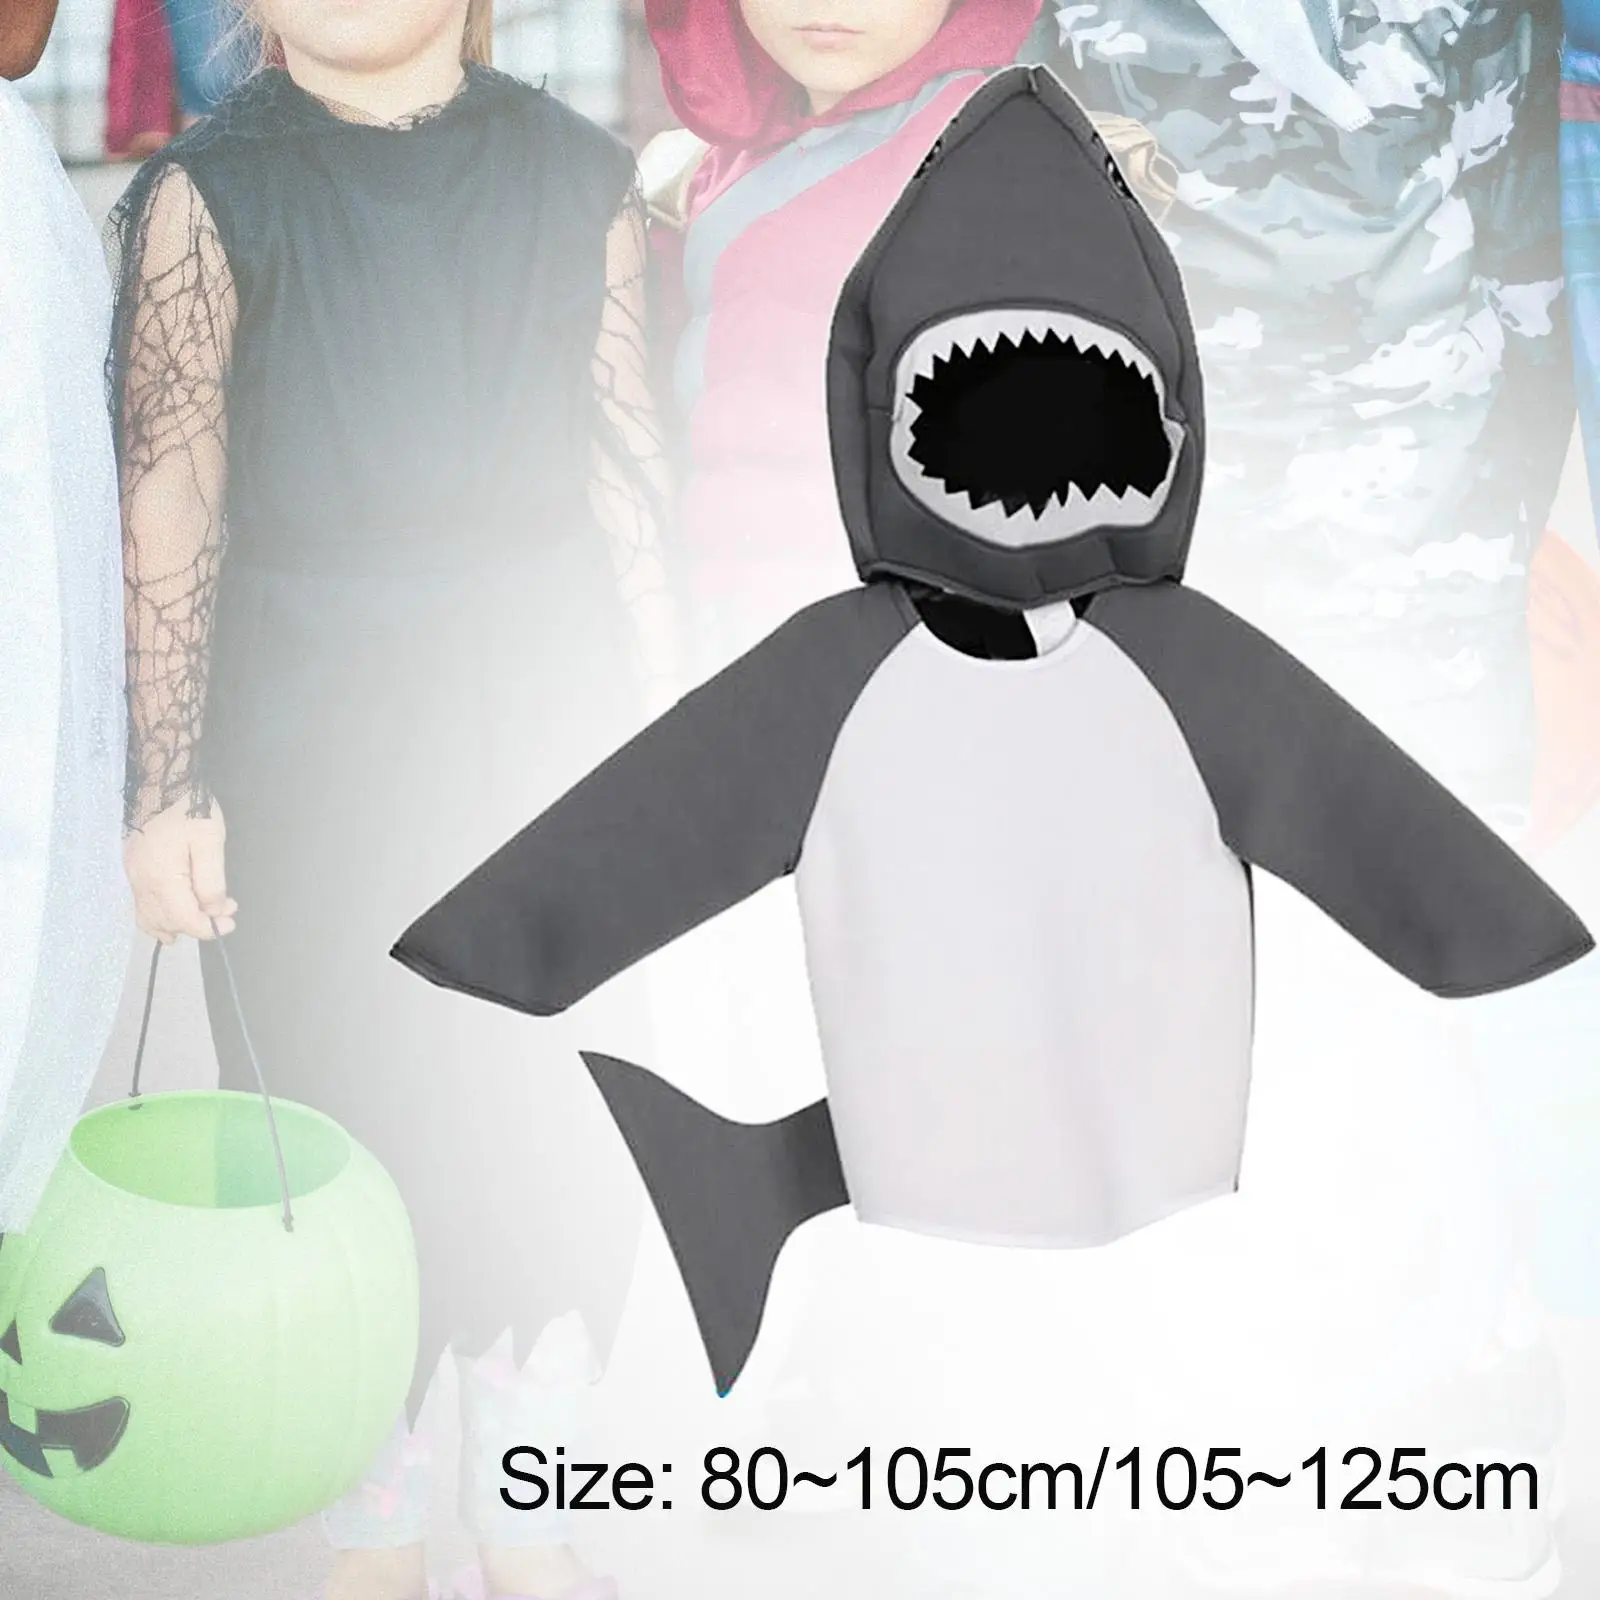 Kids Shark Costume Fancy Dress Soft Hoodie Halloween Dress up for Party Children`s Day Carnivals Stage Performance Role Playing